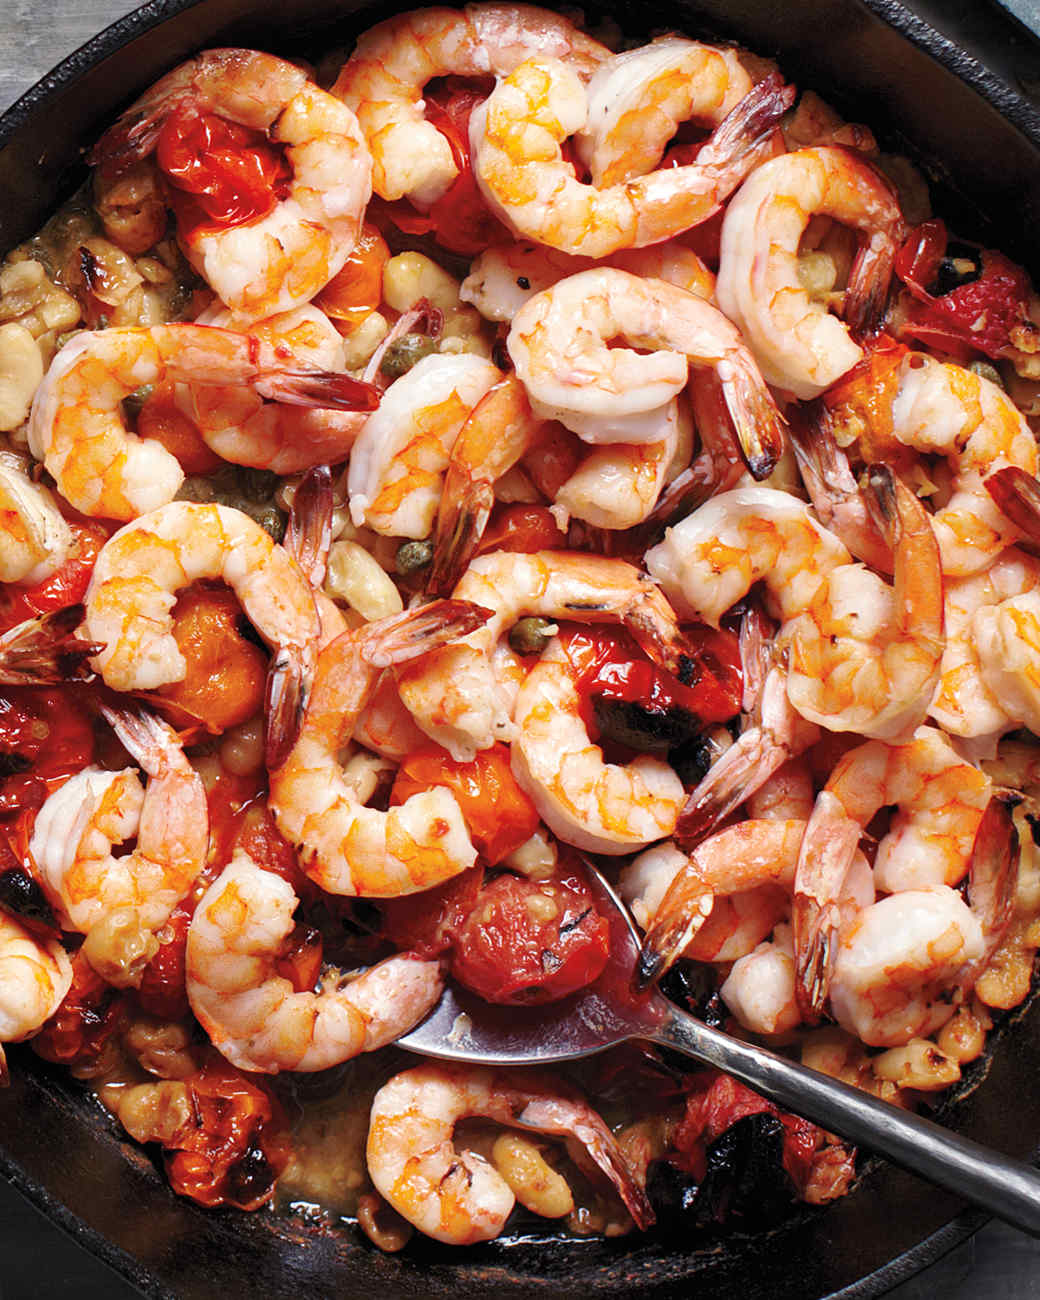 Broiled Shrimp with Tomatoes and White Beans